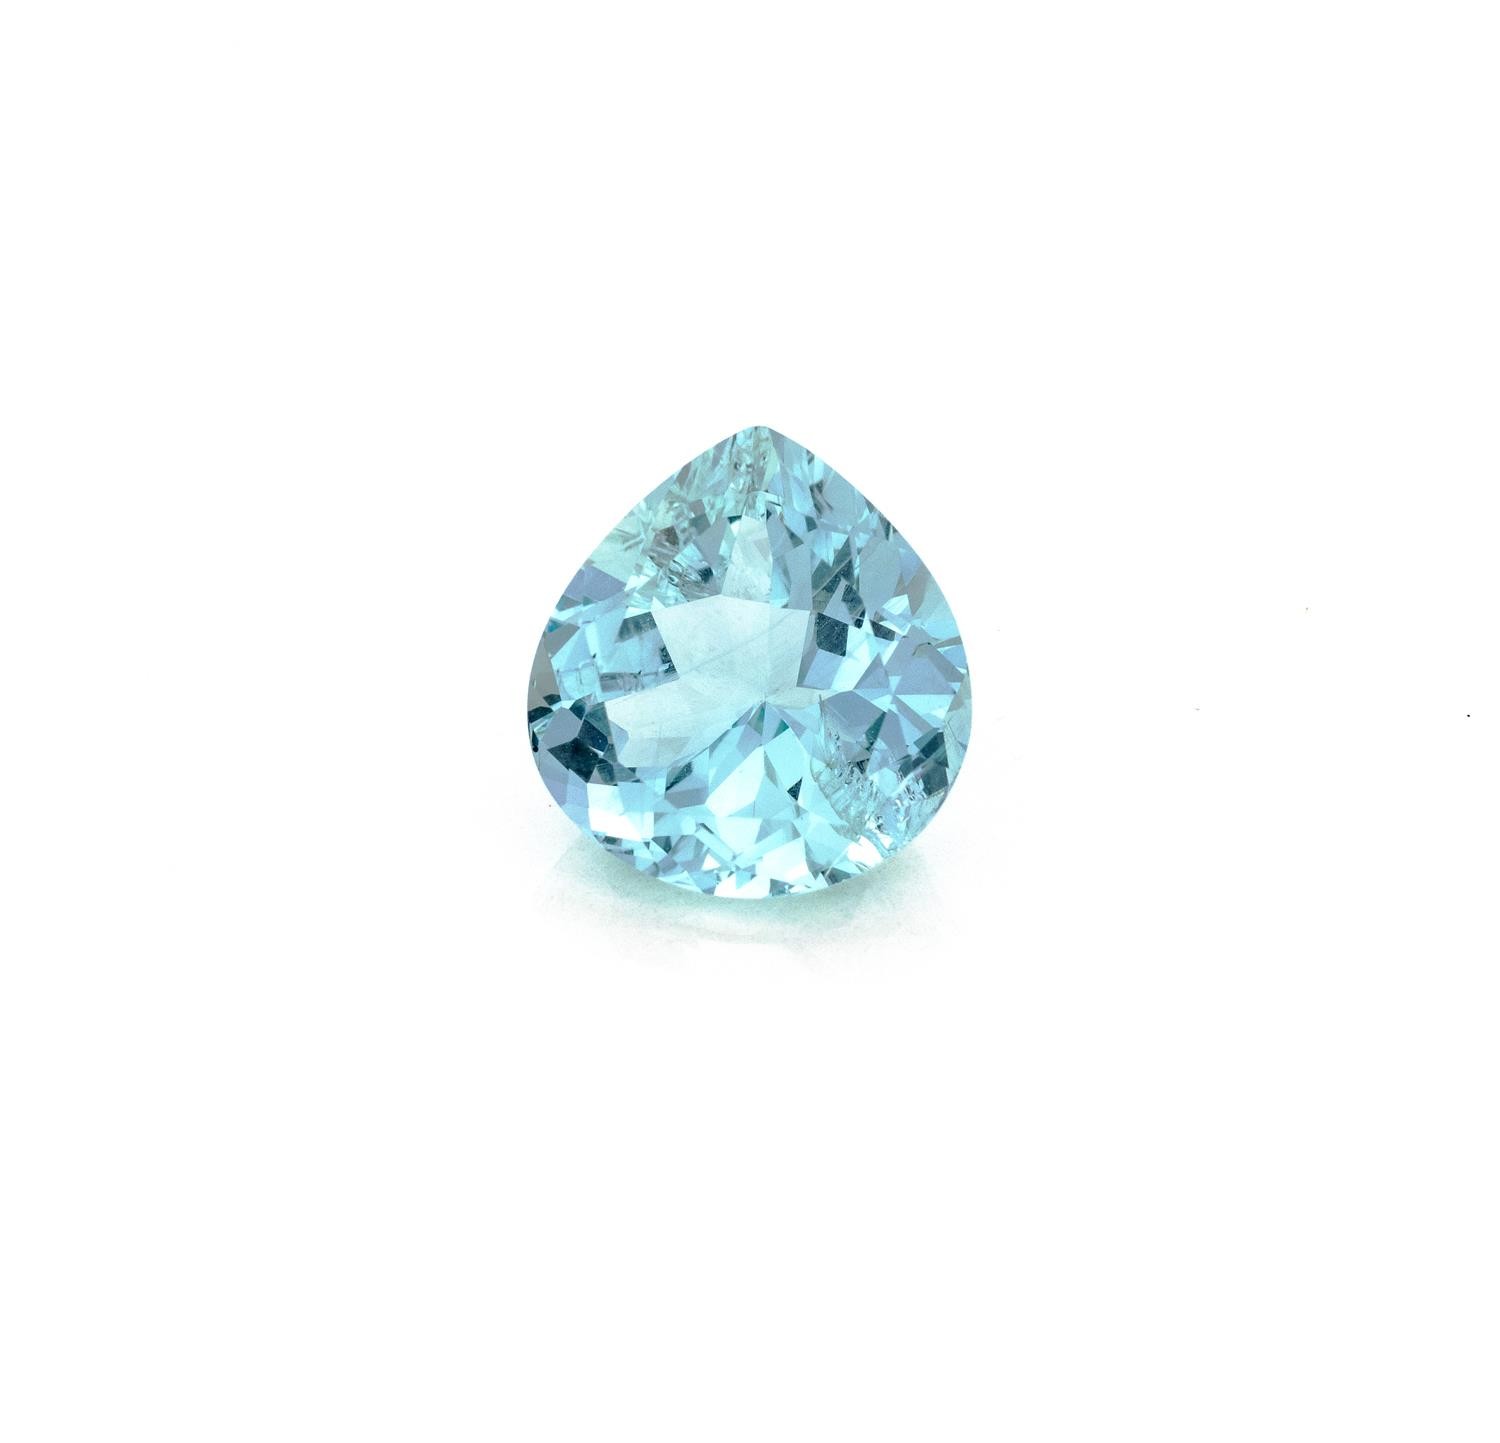 AN UNMOUNTED PEAR-SHAPED AQUAMARINE - Image 2 of 3